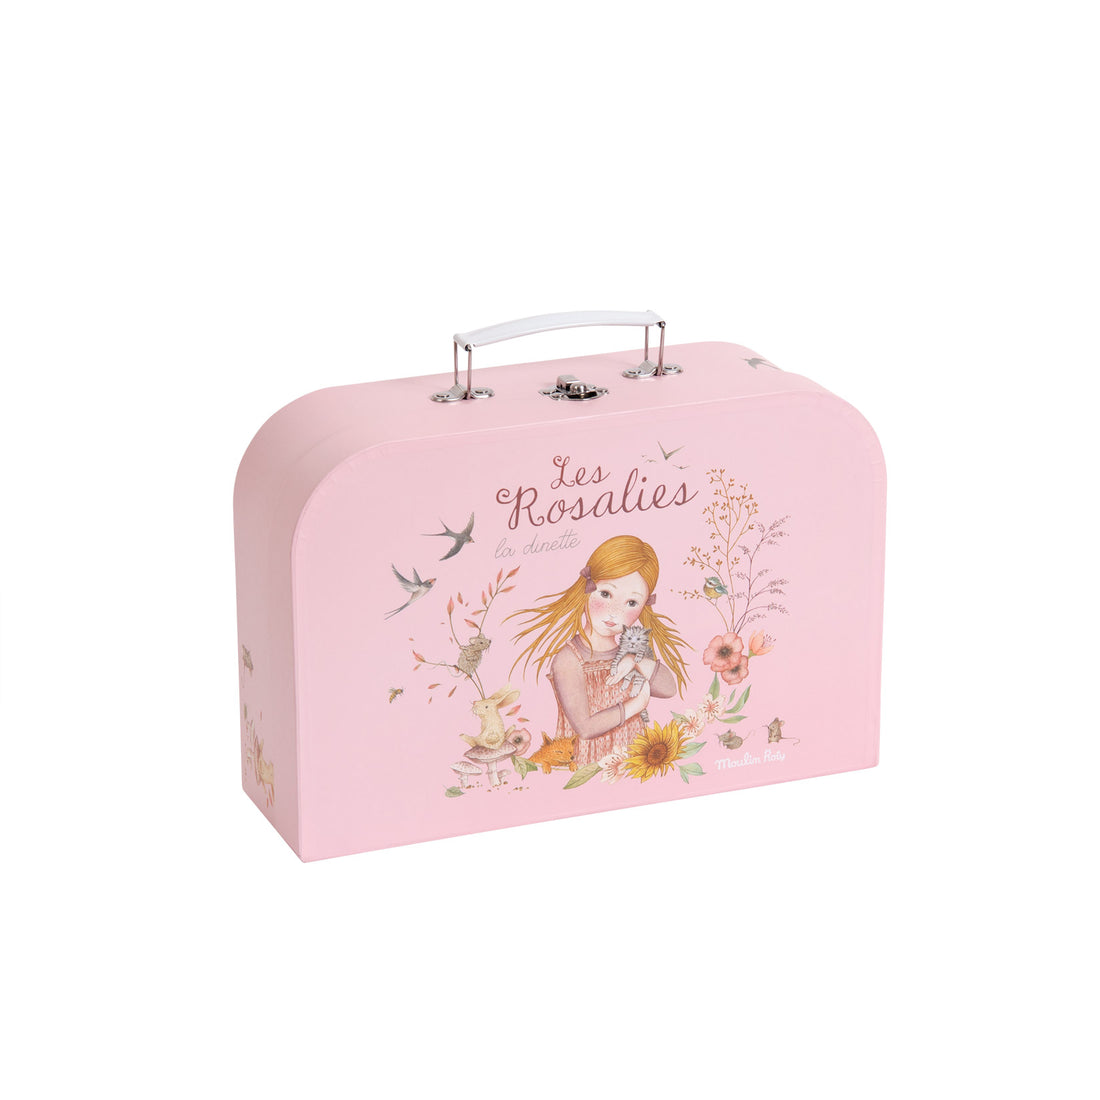 moulin-roty-les-rosalies-tea-set-14-pcs-in-beautiful-gift-box-carry-suitcase-moul-710538